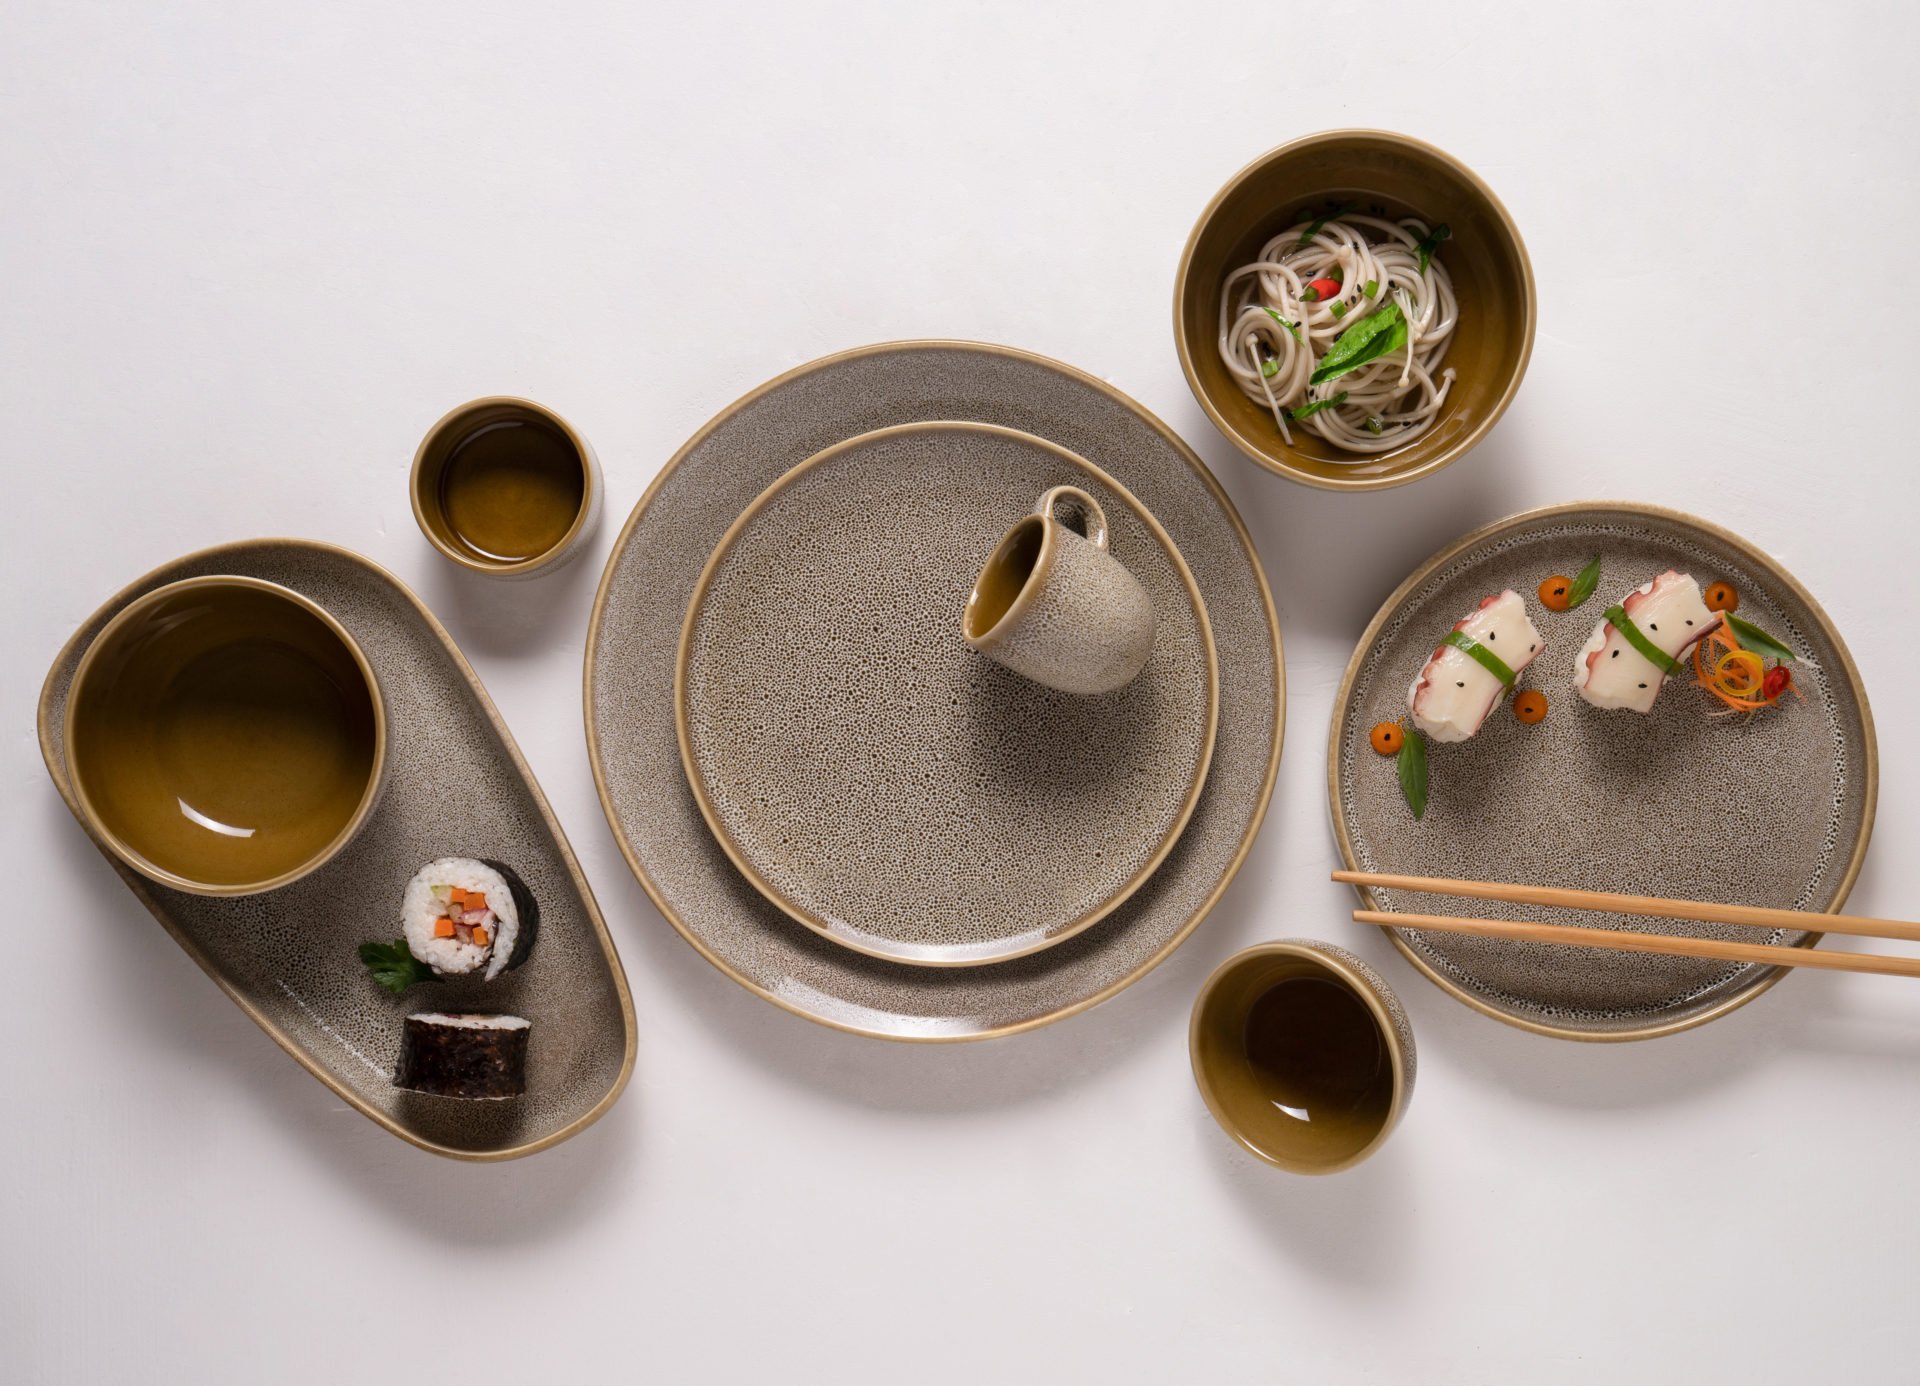 Worldchefs has partnered with Ariane Fine Porcelain, a leading manufacturer of high-quality porcelain tableware.